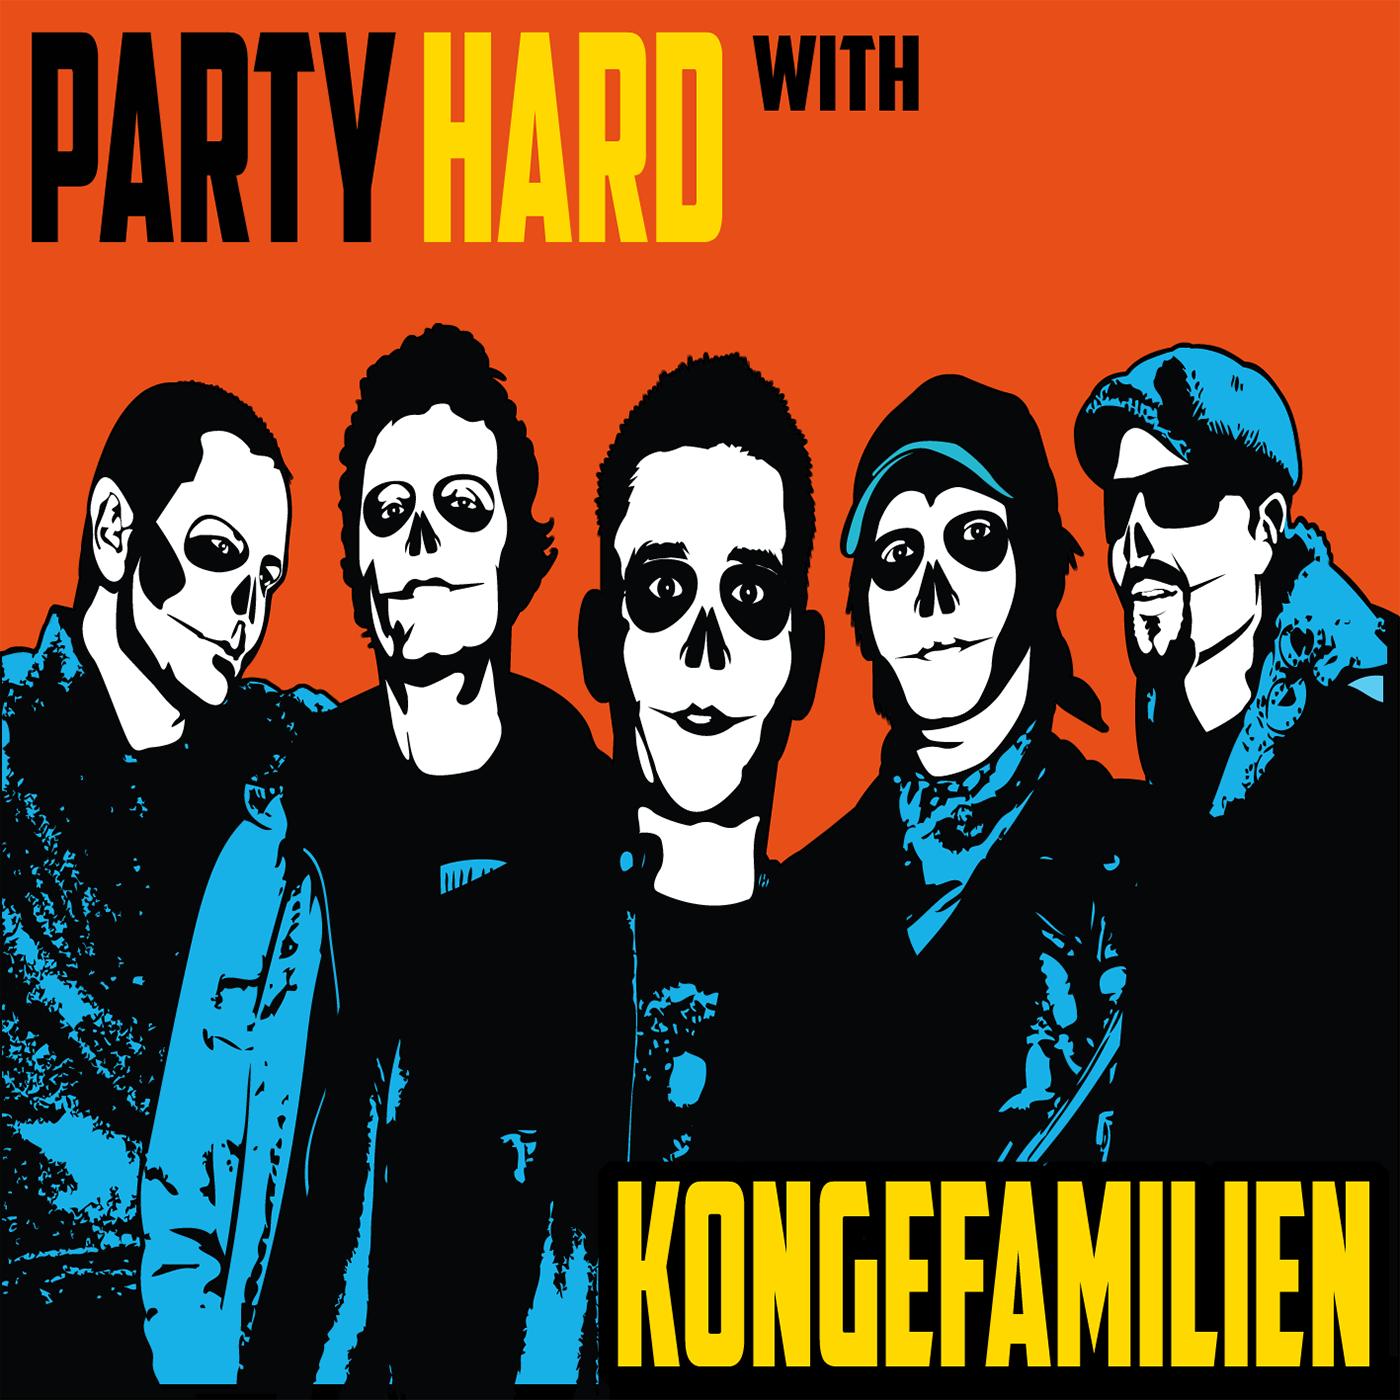 Party Hard with Kongefamilien